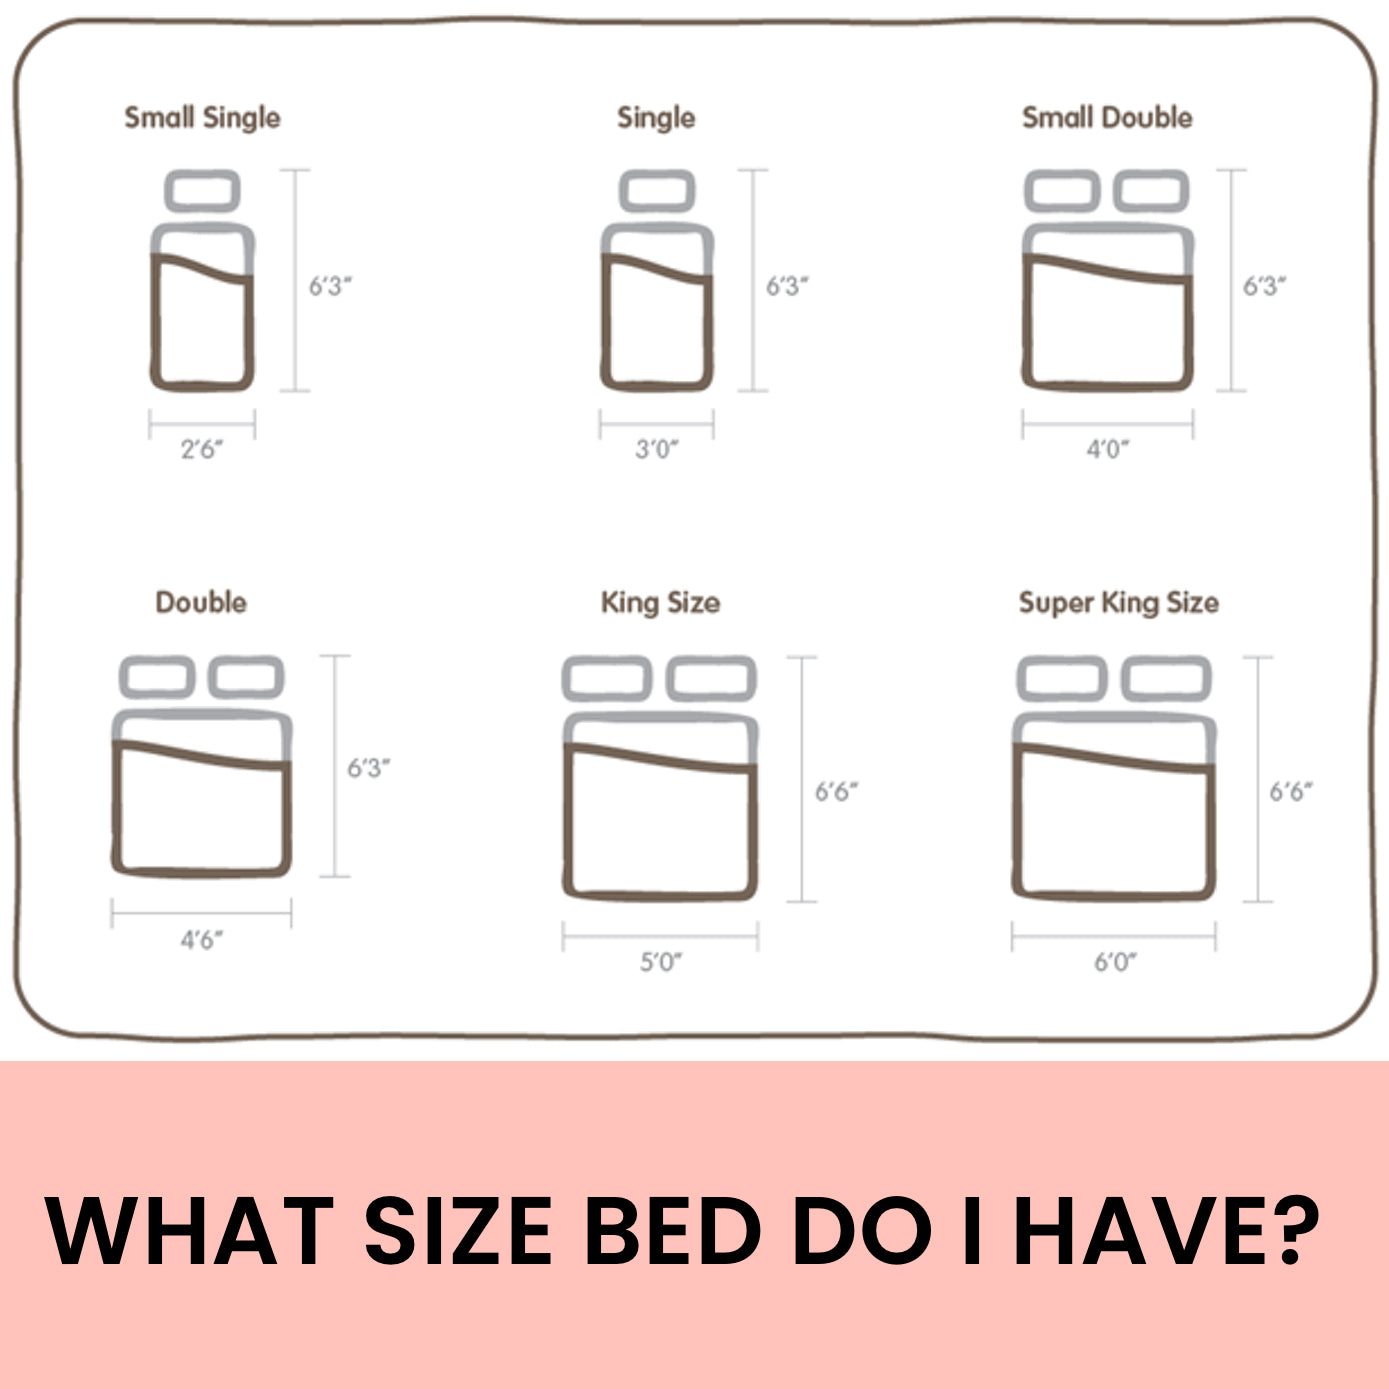 UK Bed Sizes - What size bed do I have? – Williamsons Factory Shop